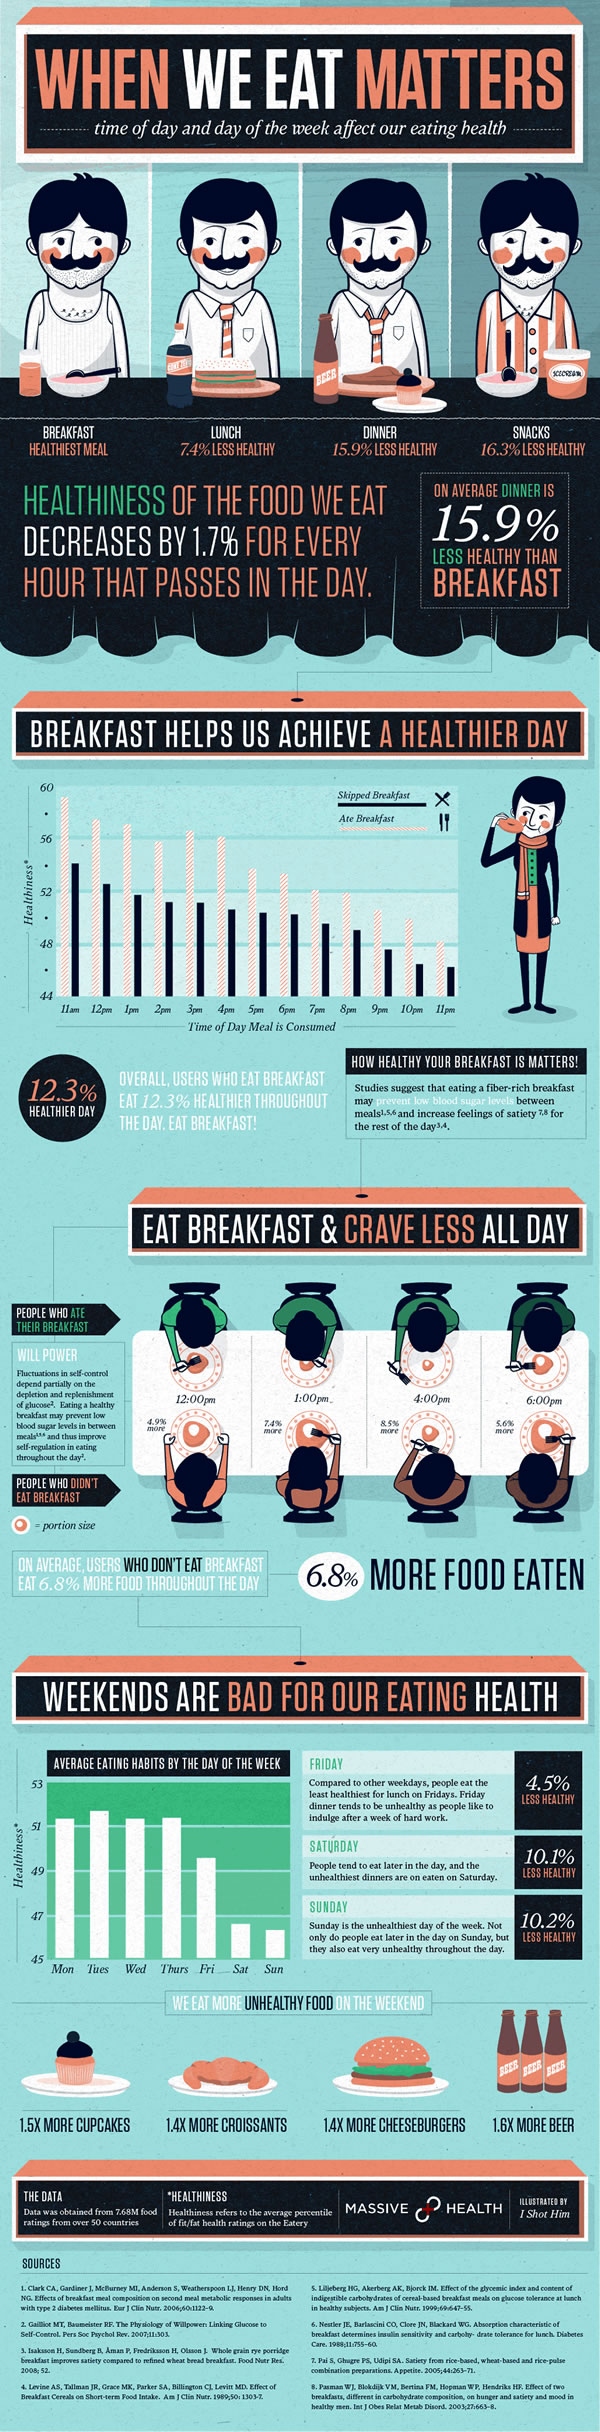 When To Eat? Infographic